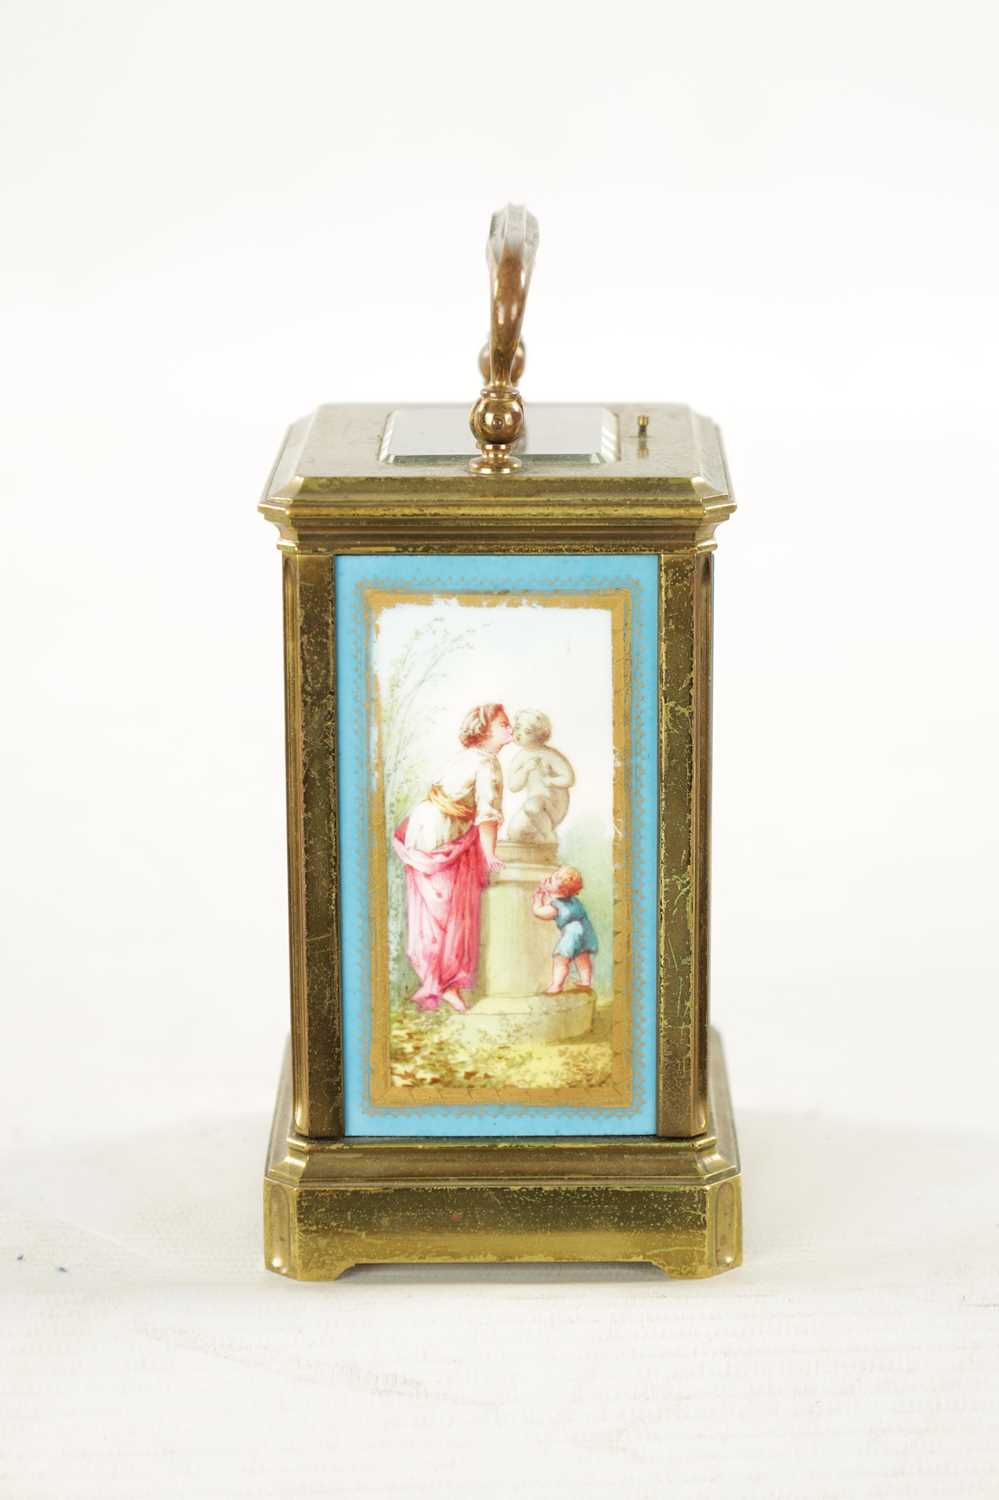 A LATE 19TH CENTURY FRENCH PORCELAIN PANELLED REPEATING CARRIAGE CLOCK - Image 8 of 10